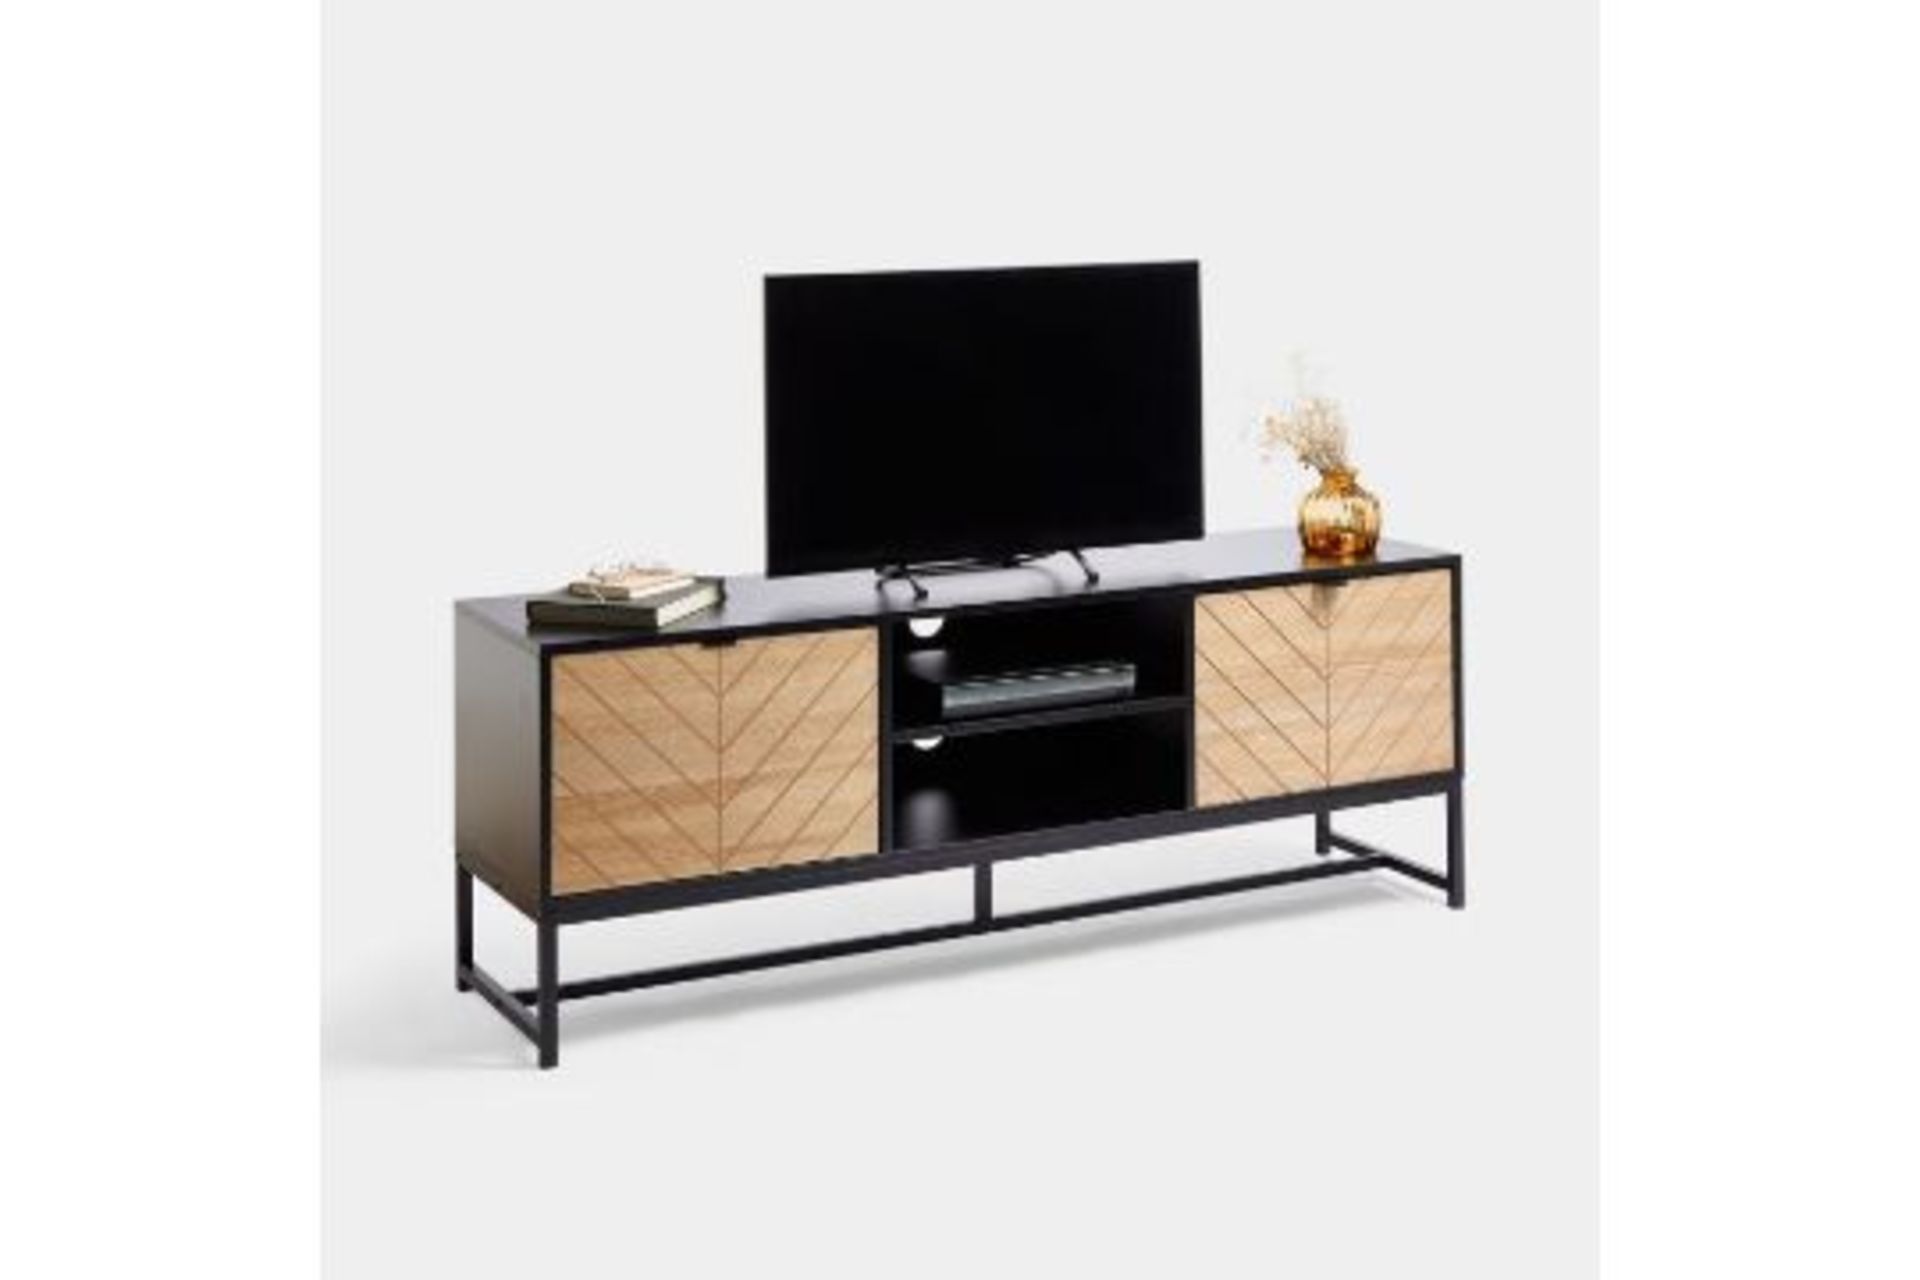 dDalton TV Unit. - PW. The TV stand’s large top surface offers ample room to display a television